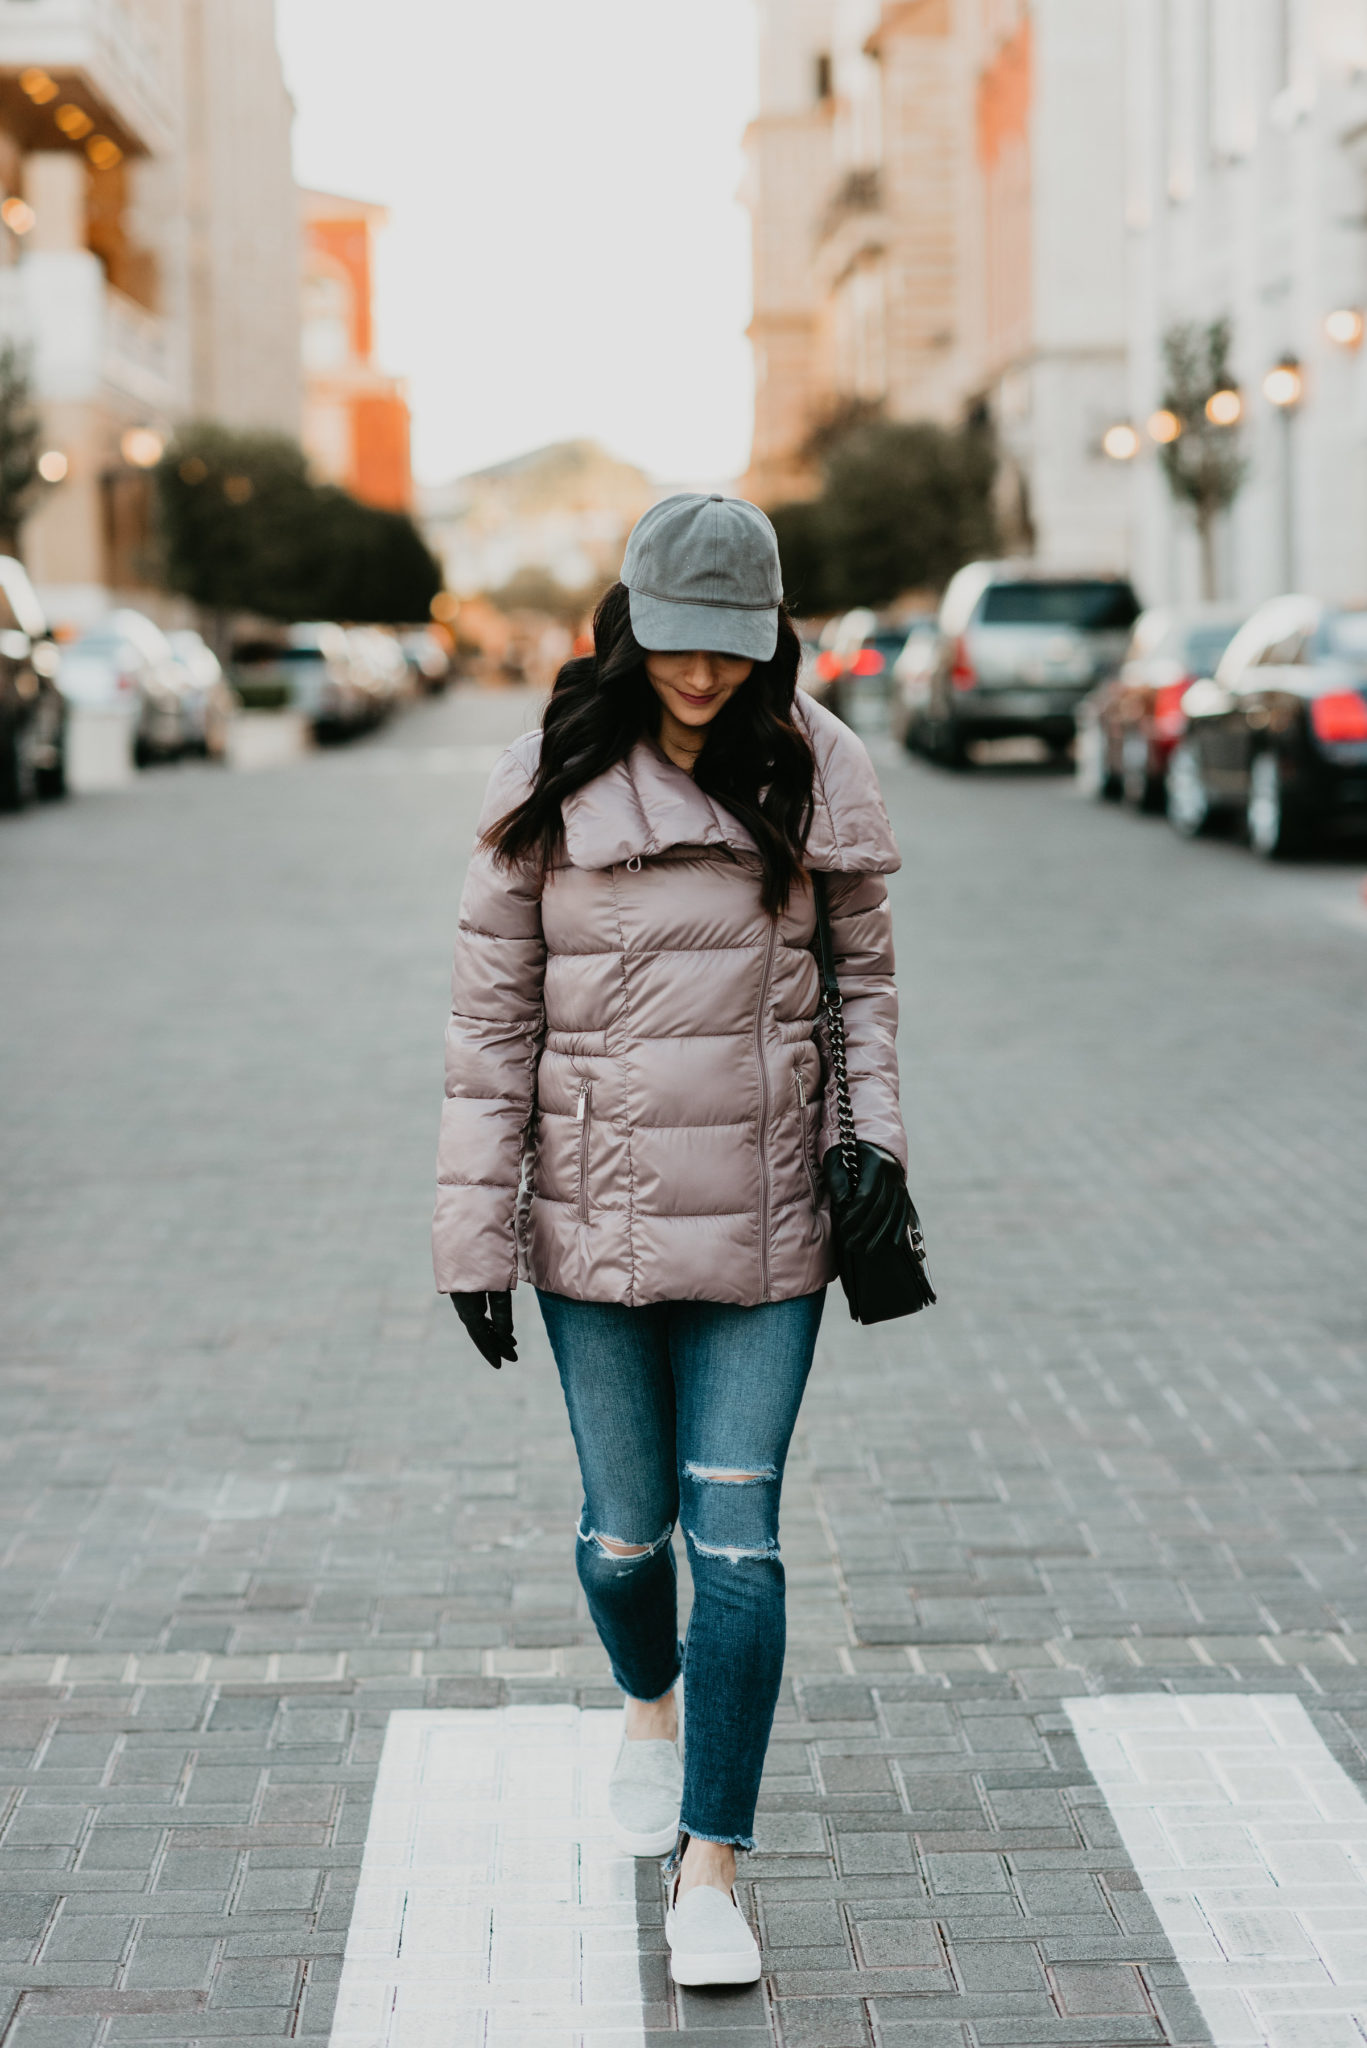 puffer jacket outfit with baseball cap and sneakers | casual winter outfit - Puffer Jacket Outfit styled by popular Las Vegas fashion blogger, Outfits & Outings